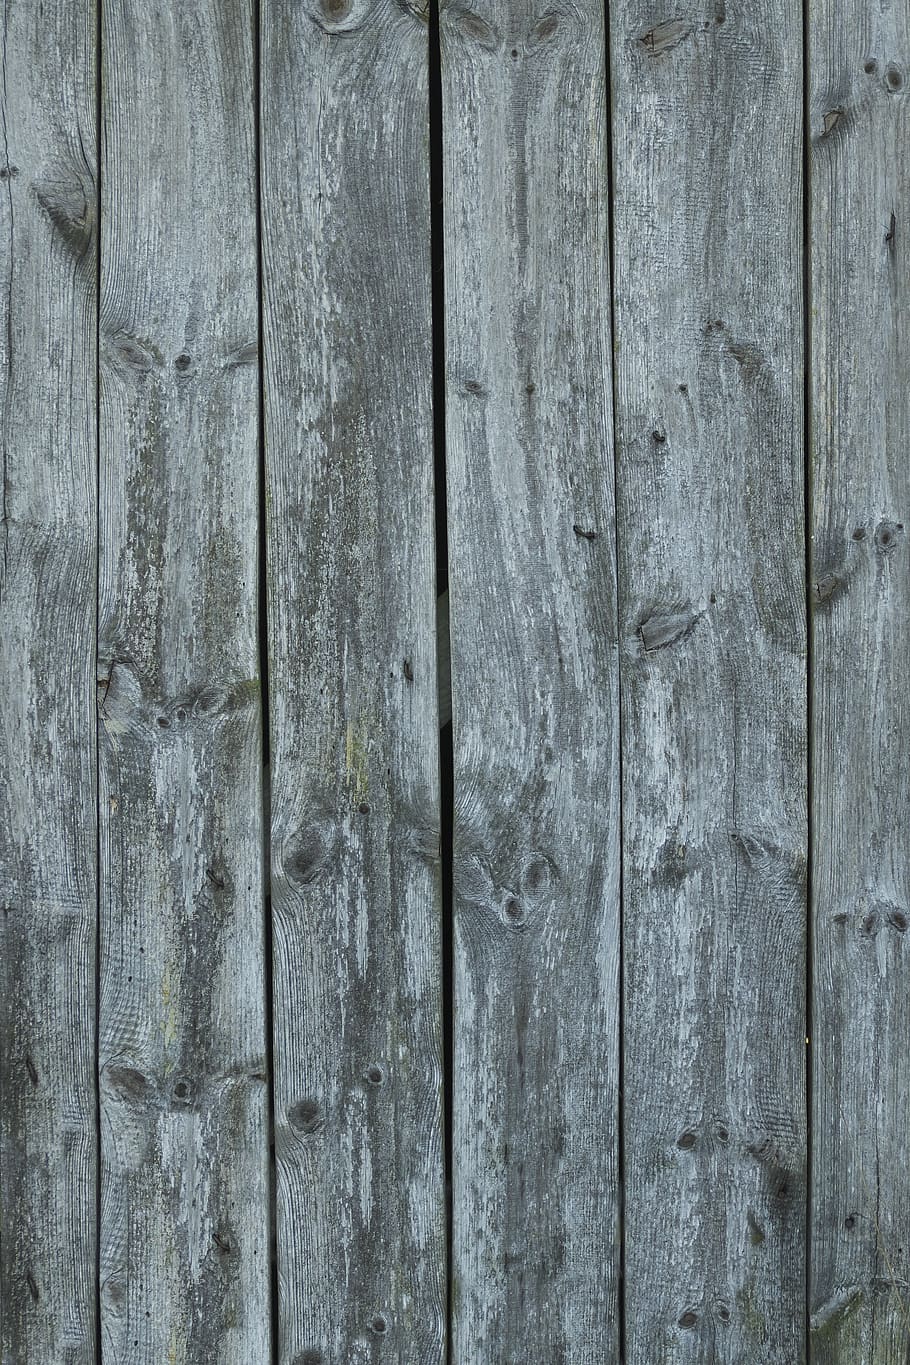 wooden boards, boards, wooden gate, old, barn, weathered, branches, battens, wood, board